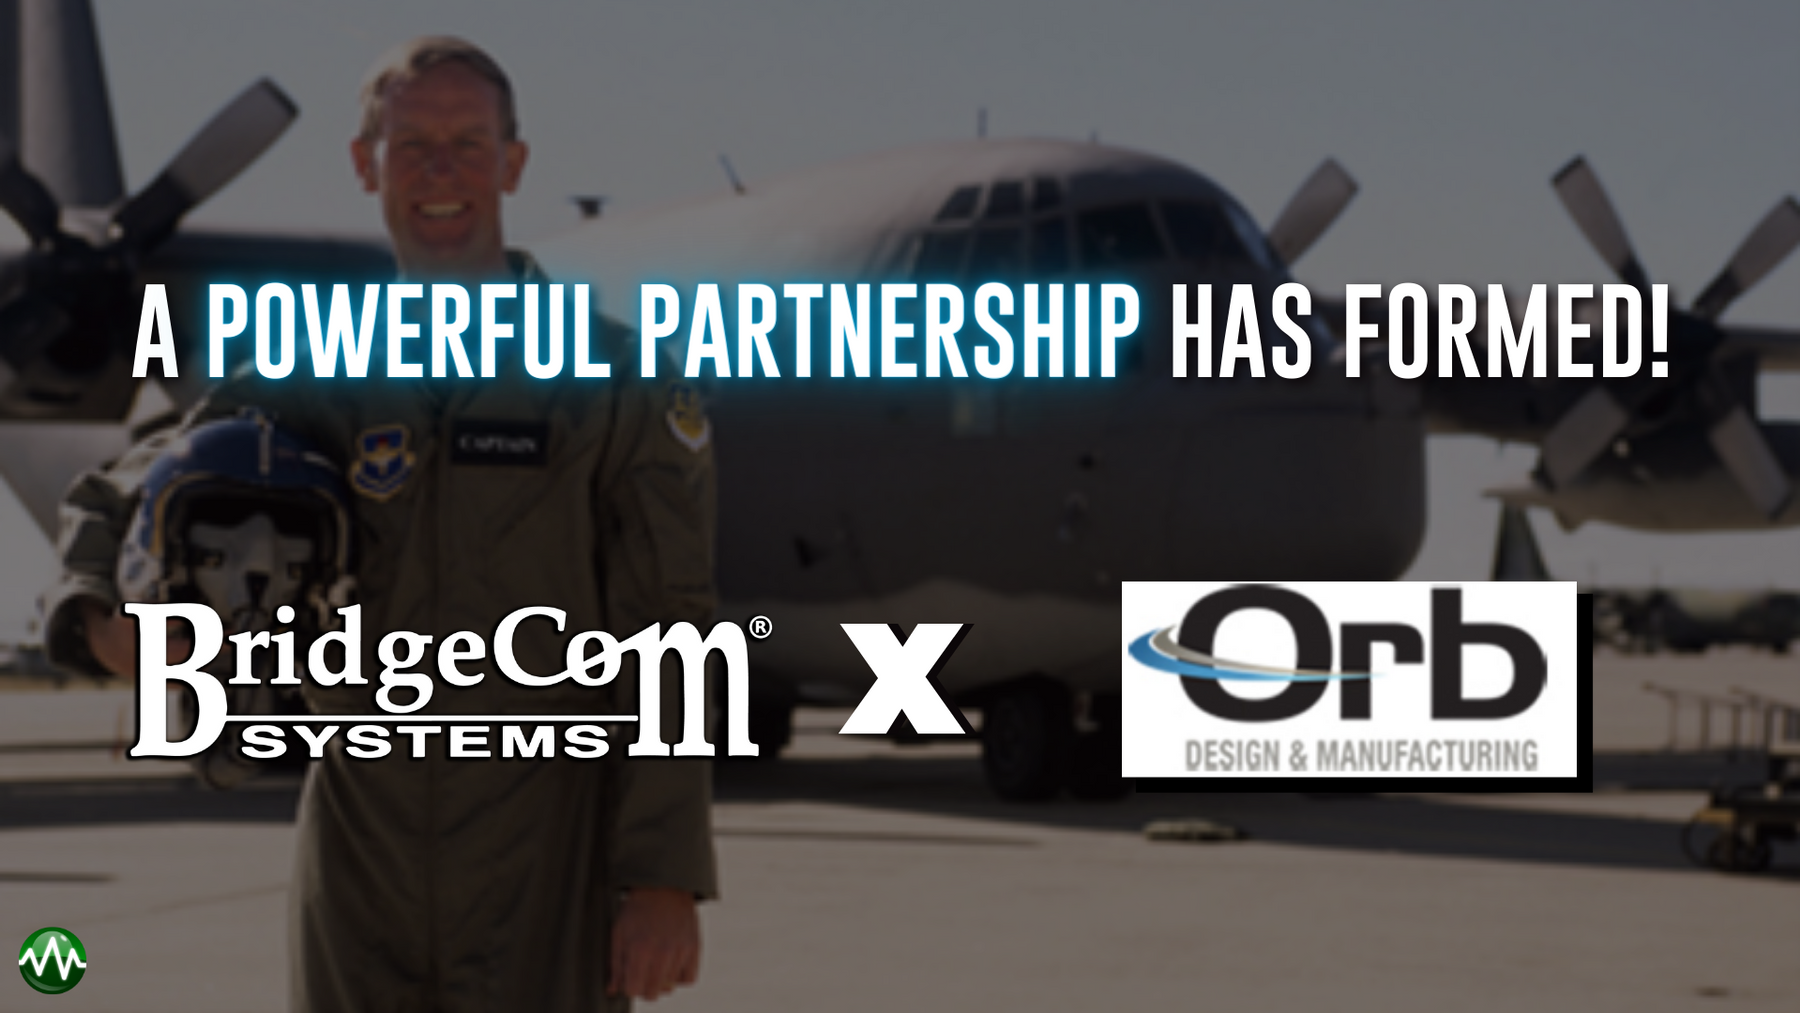 Orb Design & Manufacturing Elevates Military-Grade Components Partnership with BridgeCom Systems